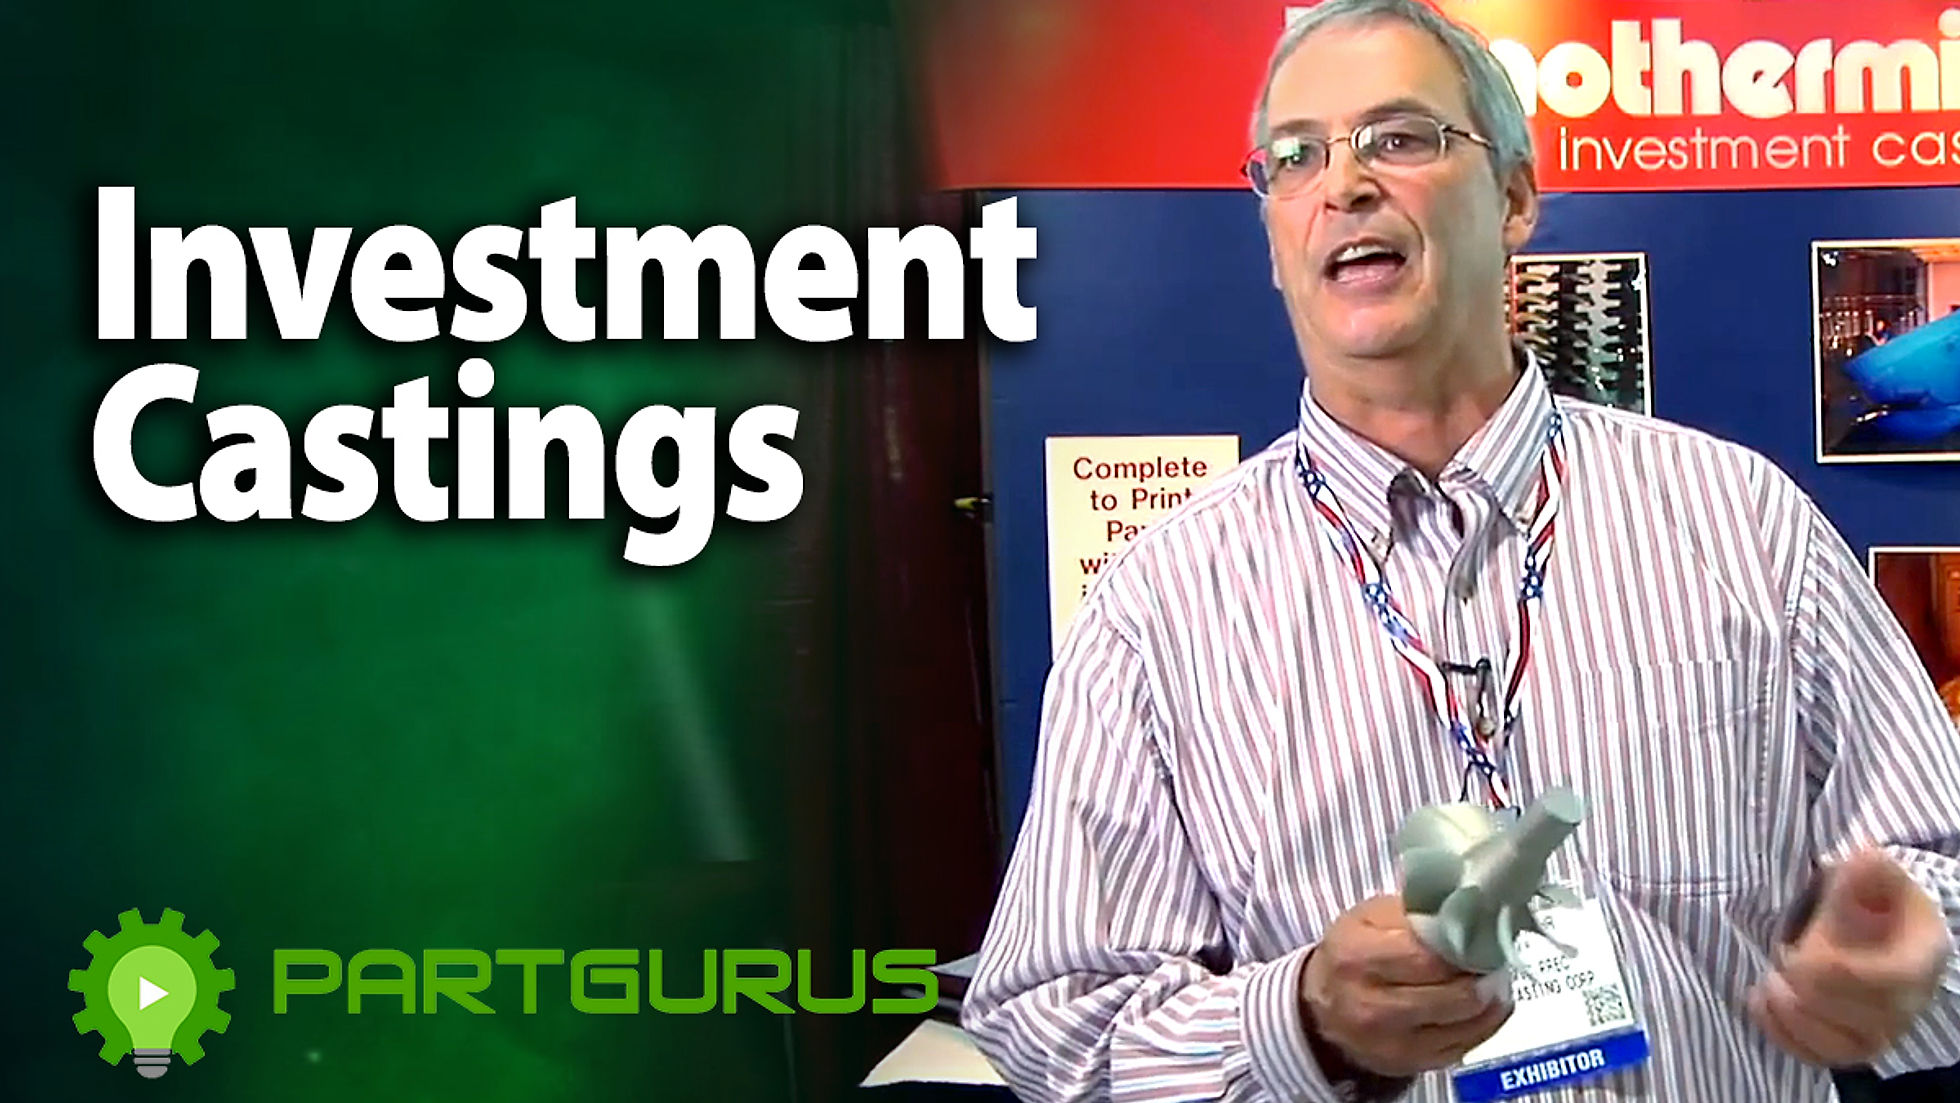 Investment castings